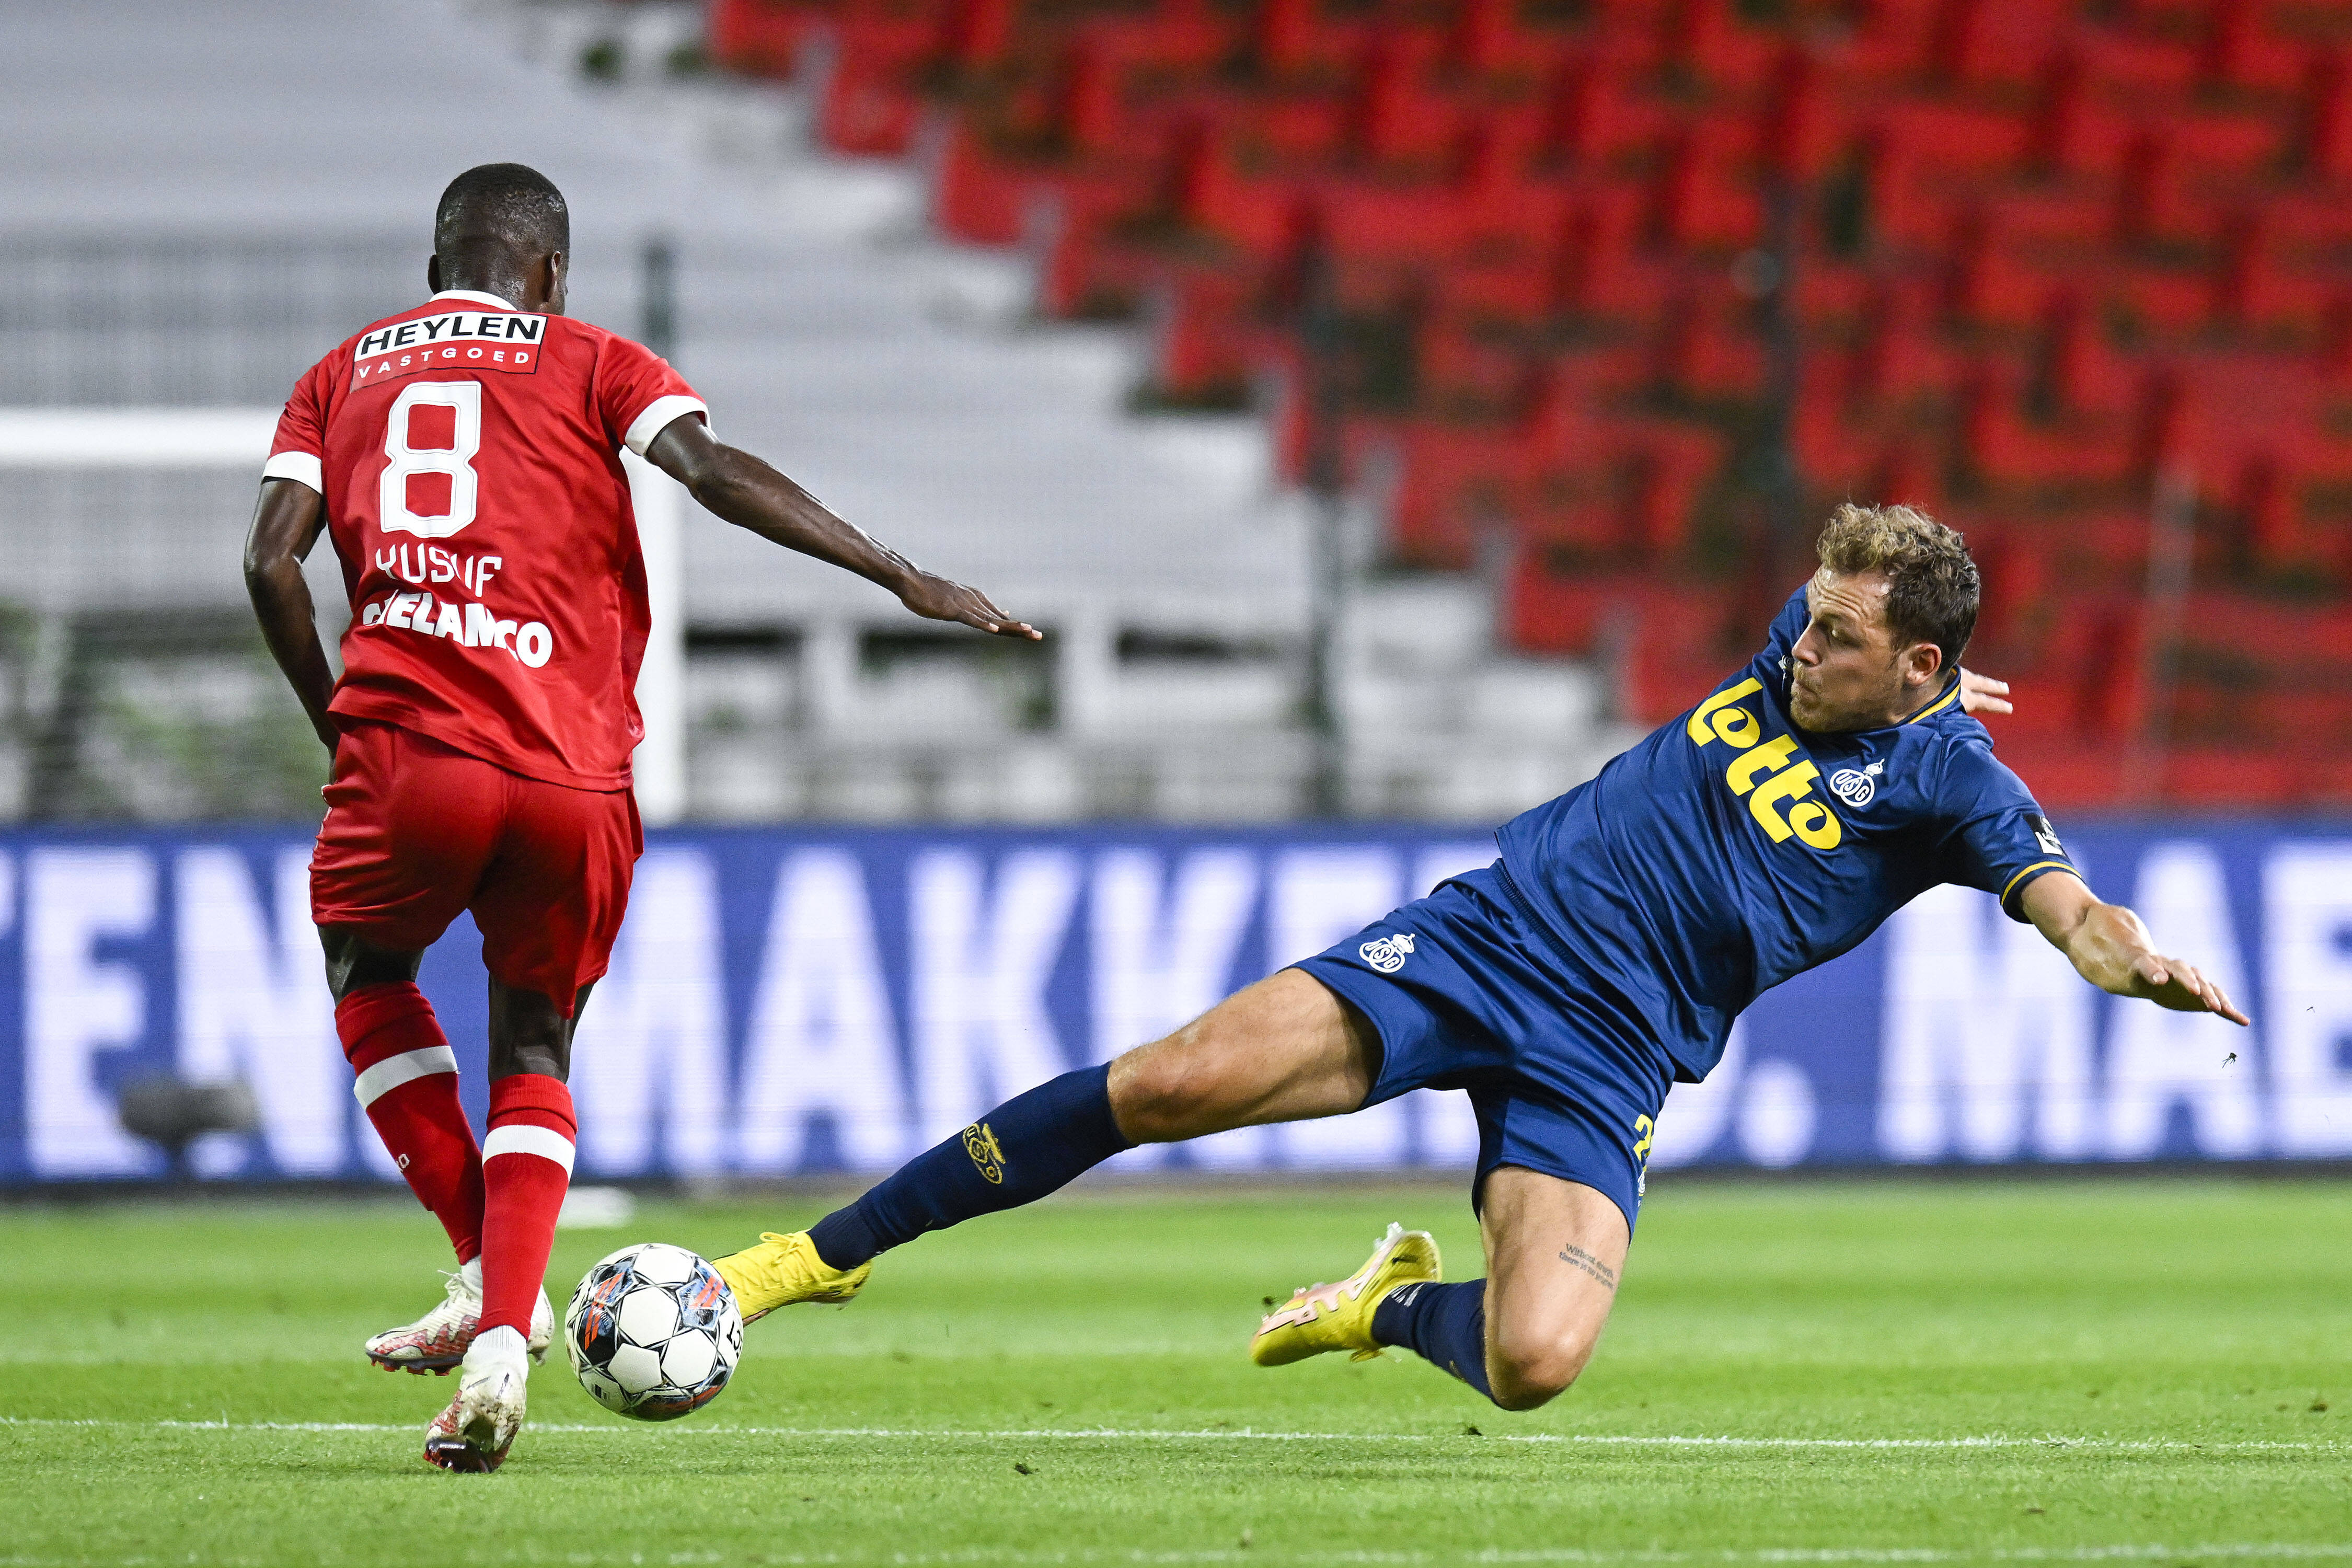 Alhassan Yusuf had another fine game for Royal Antwerp